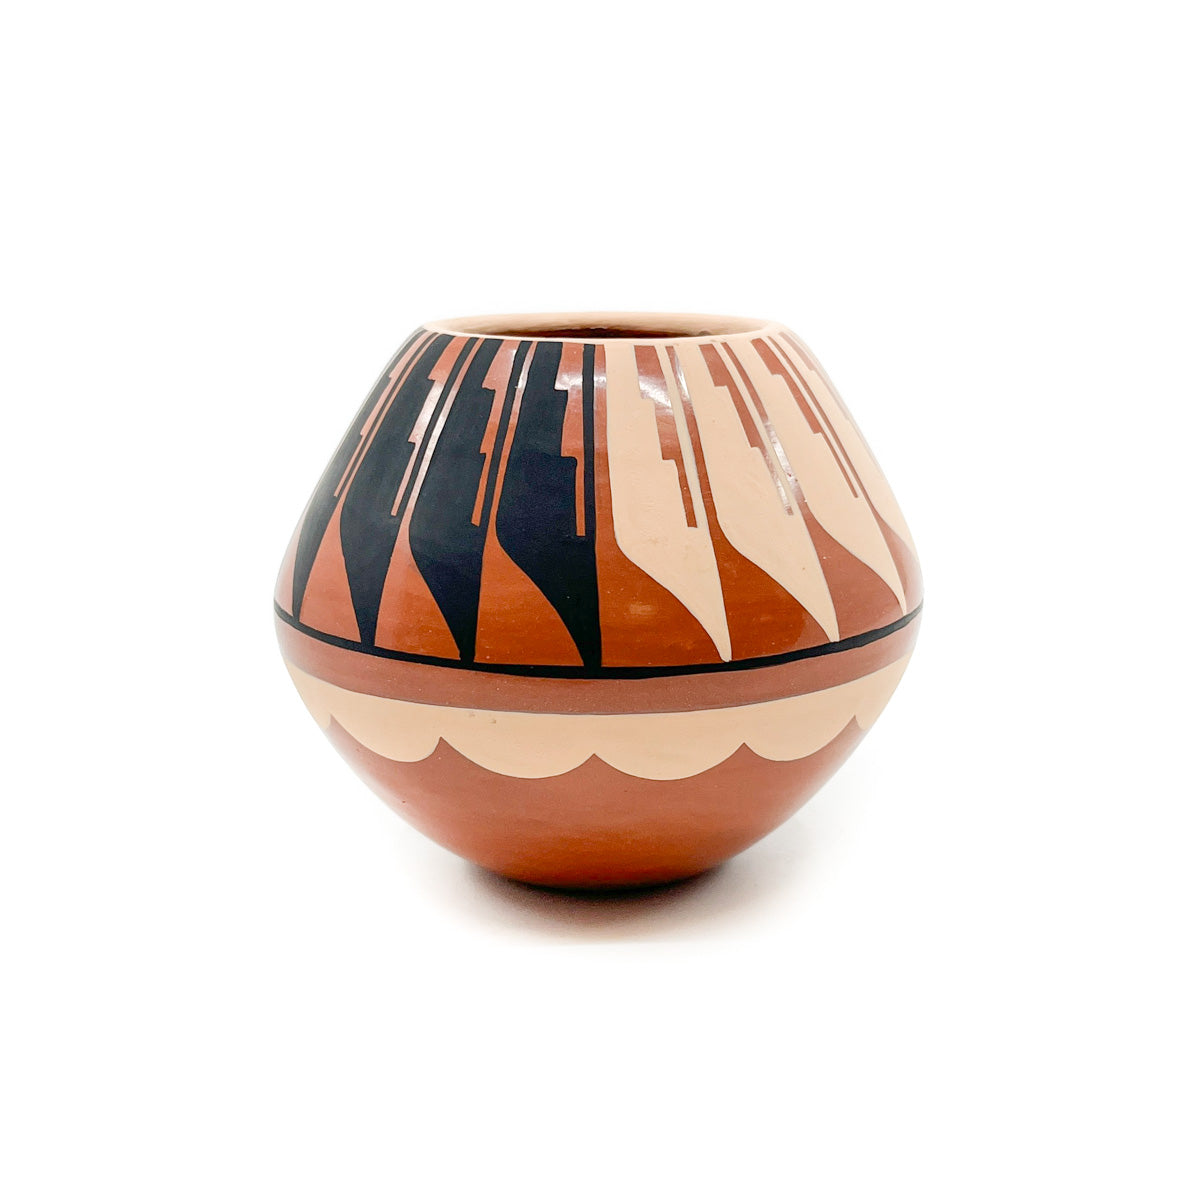 Load image into Gallery viewer, Jemez Seed Pot by C. G. Loretto
